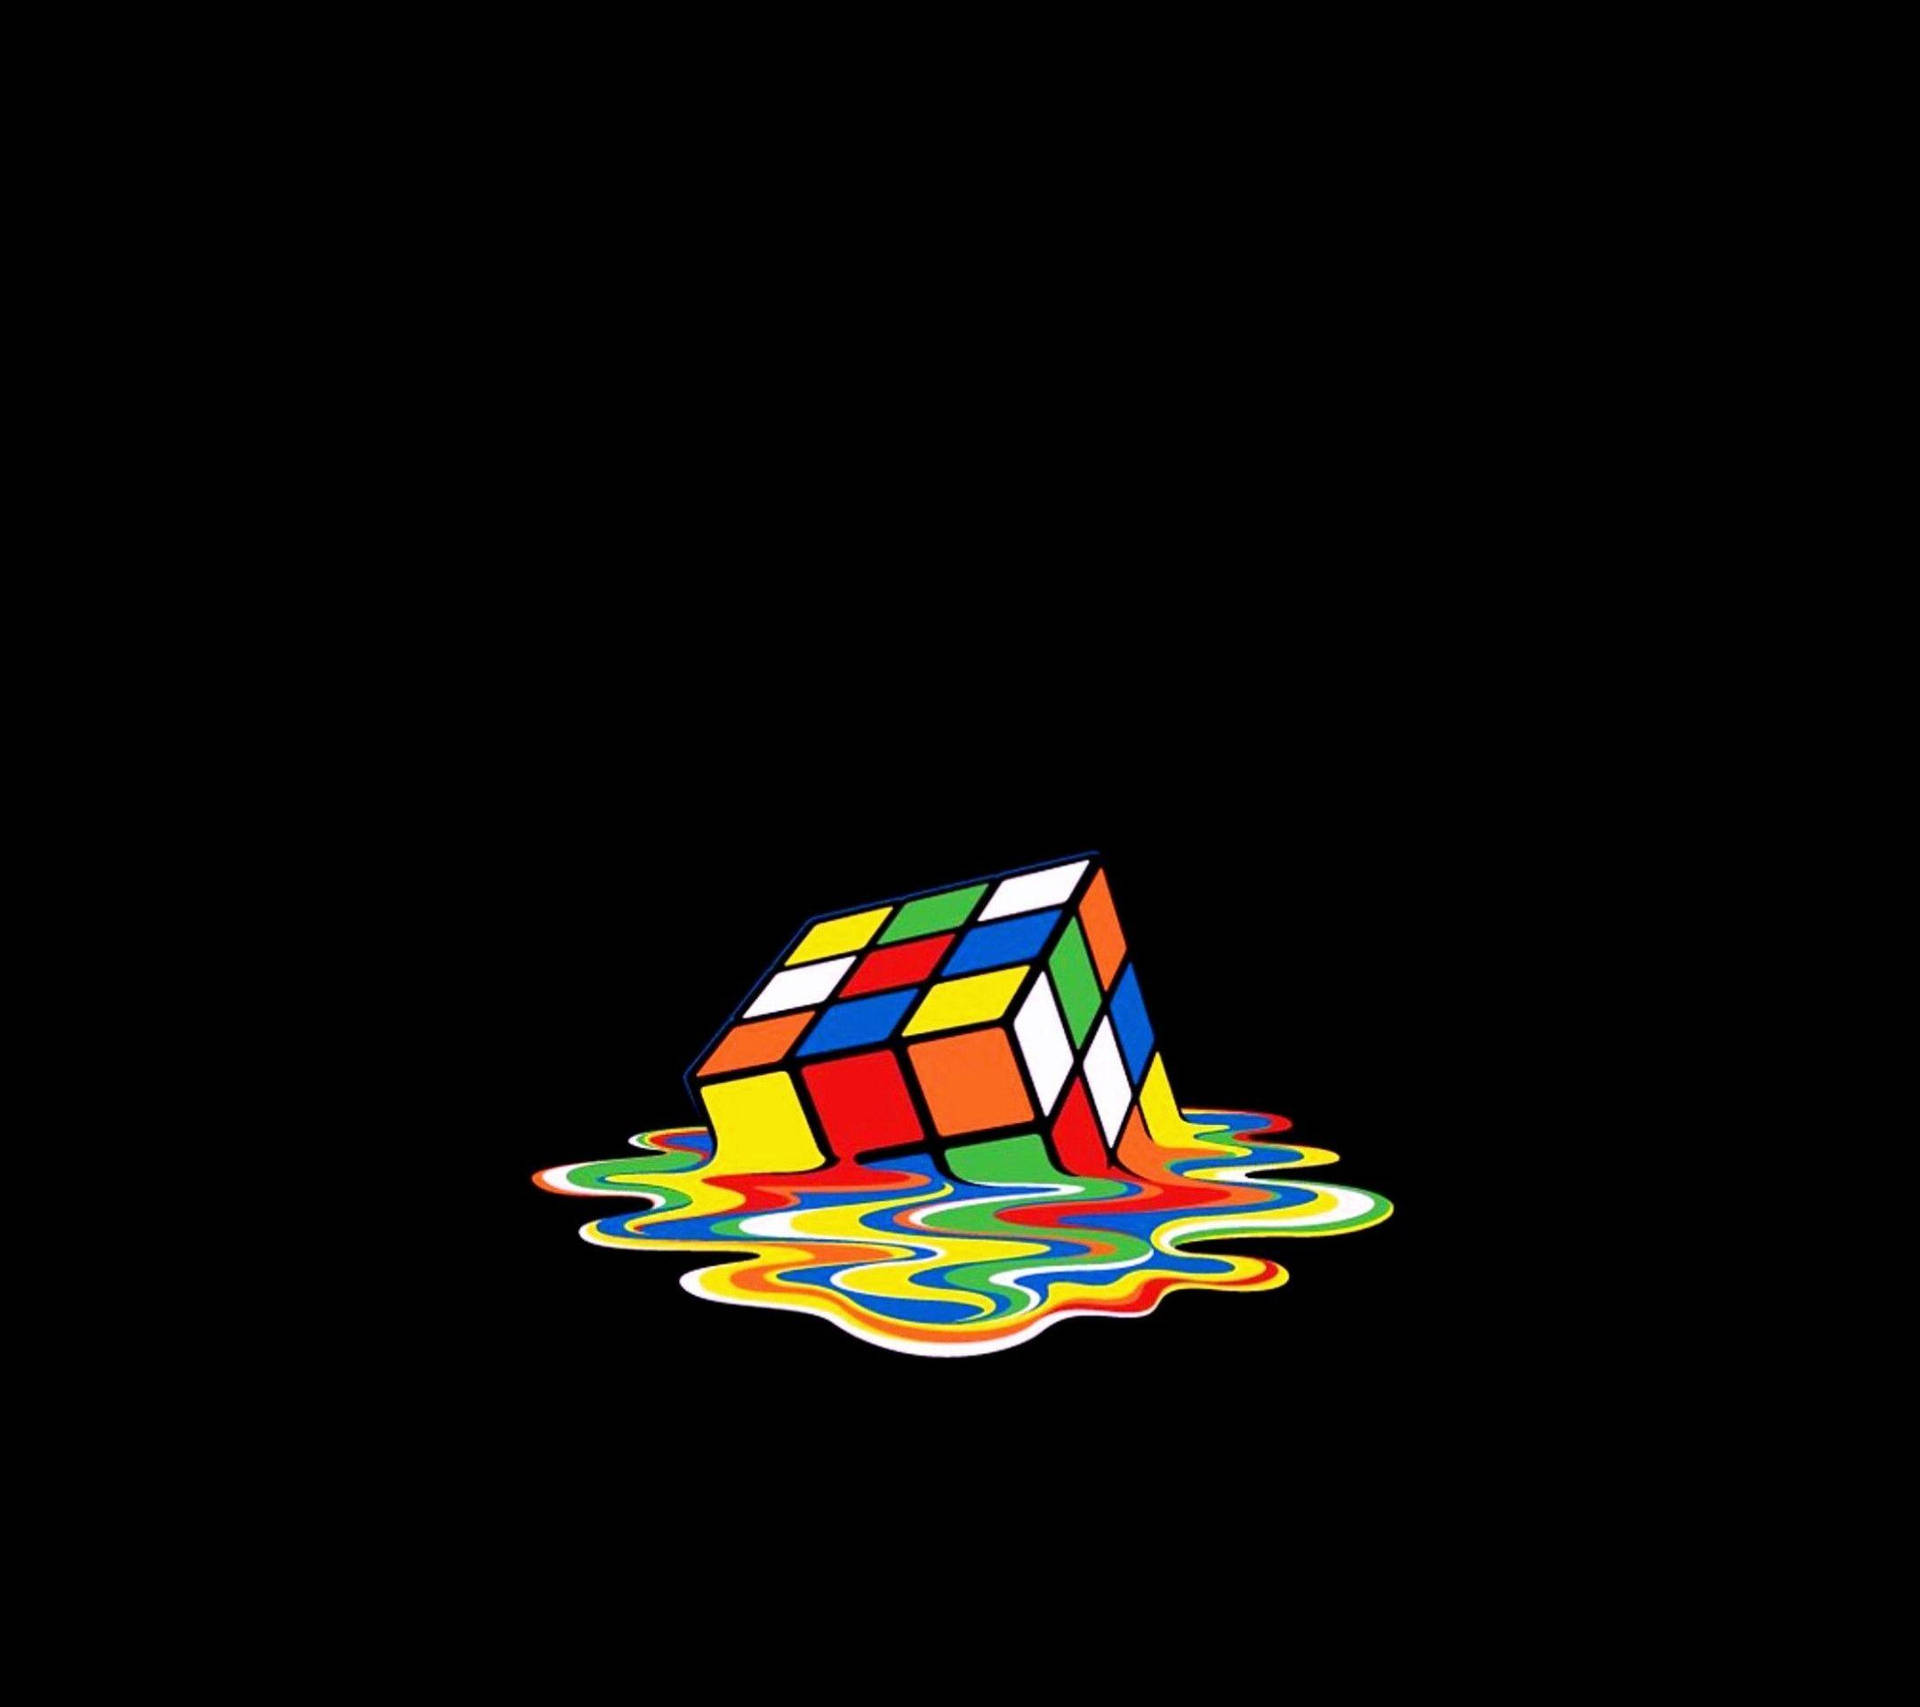 Amoled 2160X1920 Wallpaper and Background Image